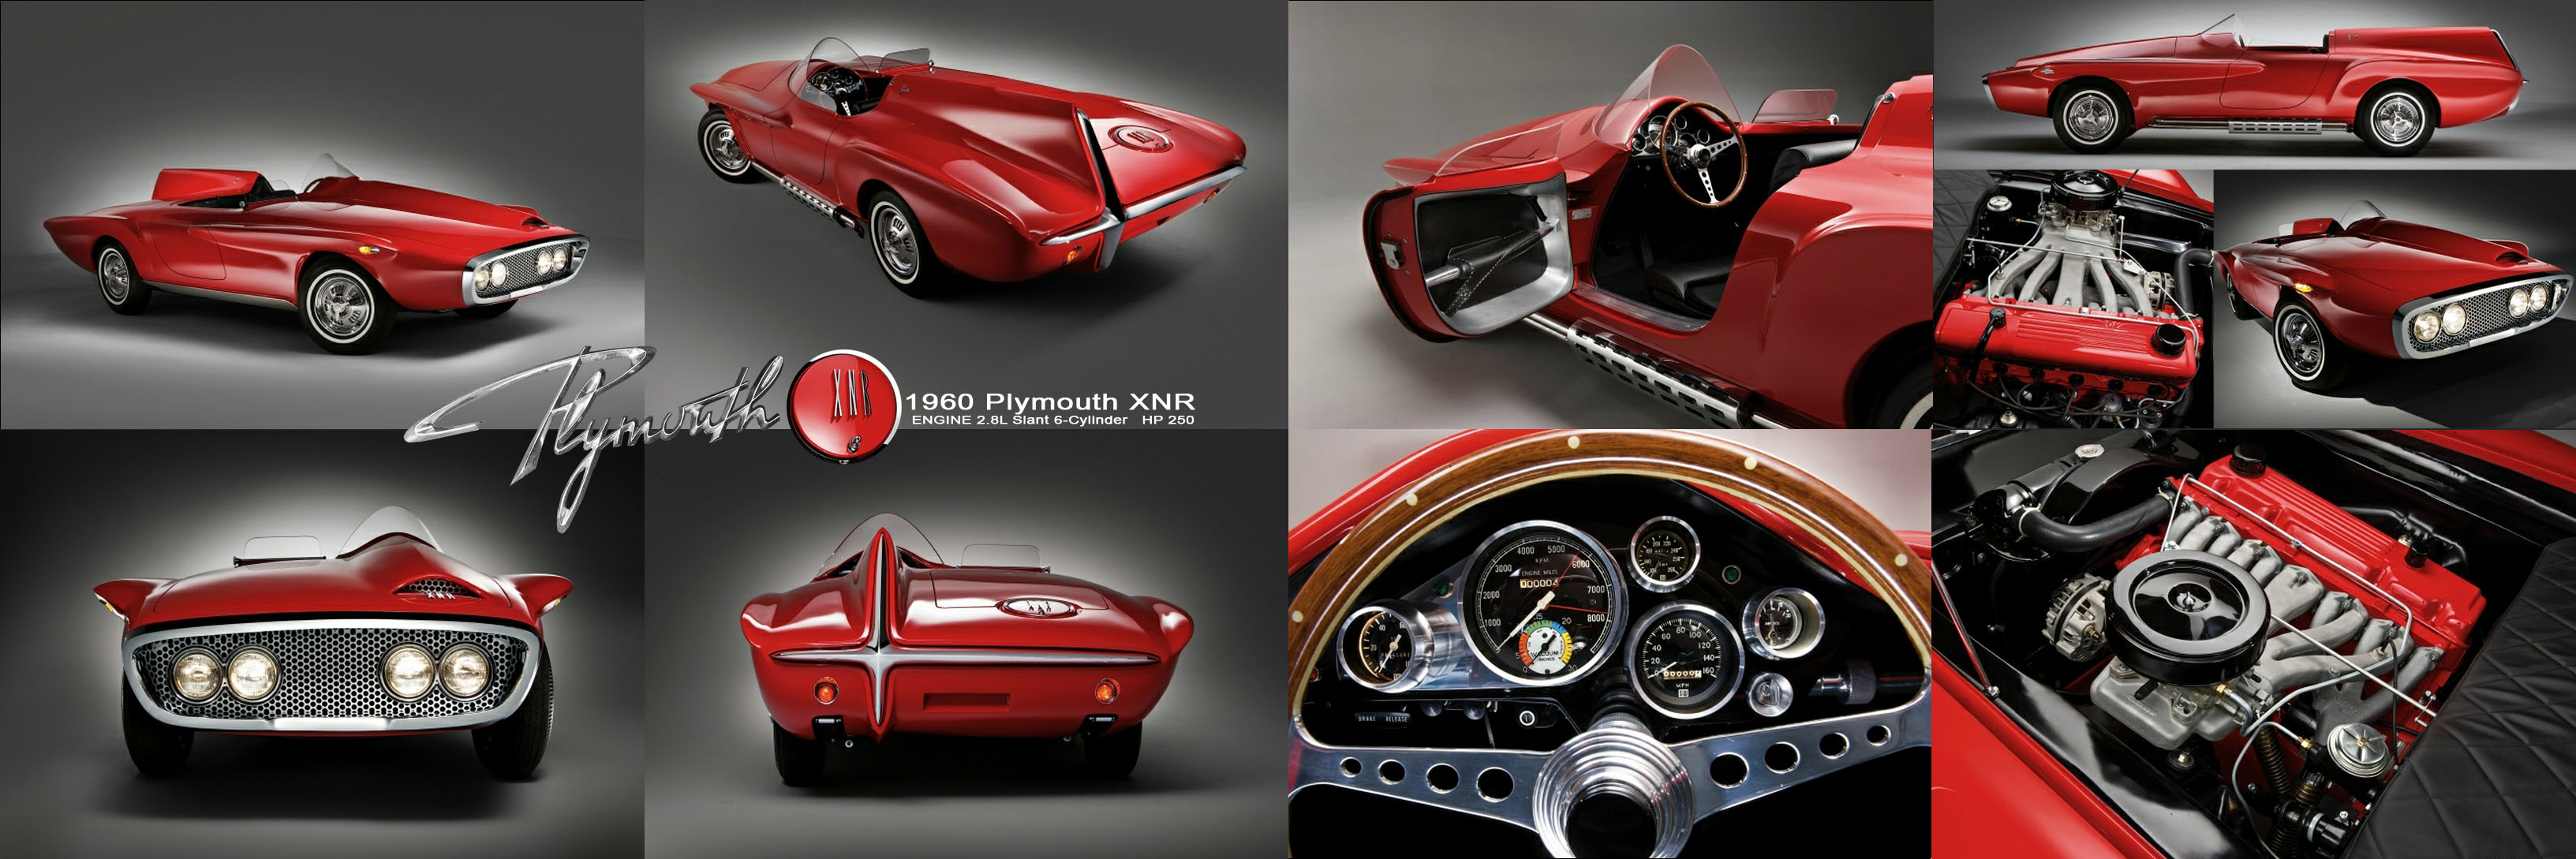 1960 Plymouth Xnr Wallpapers